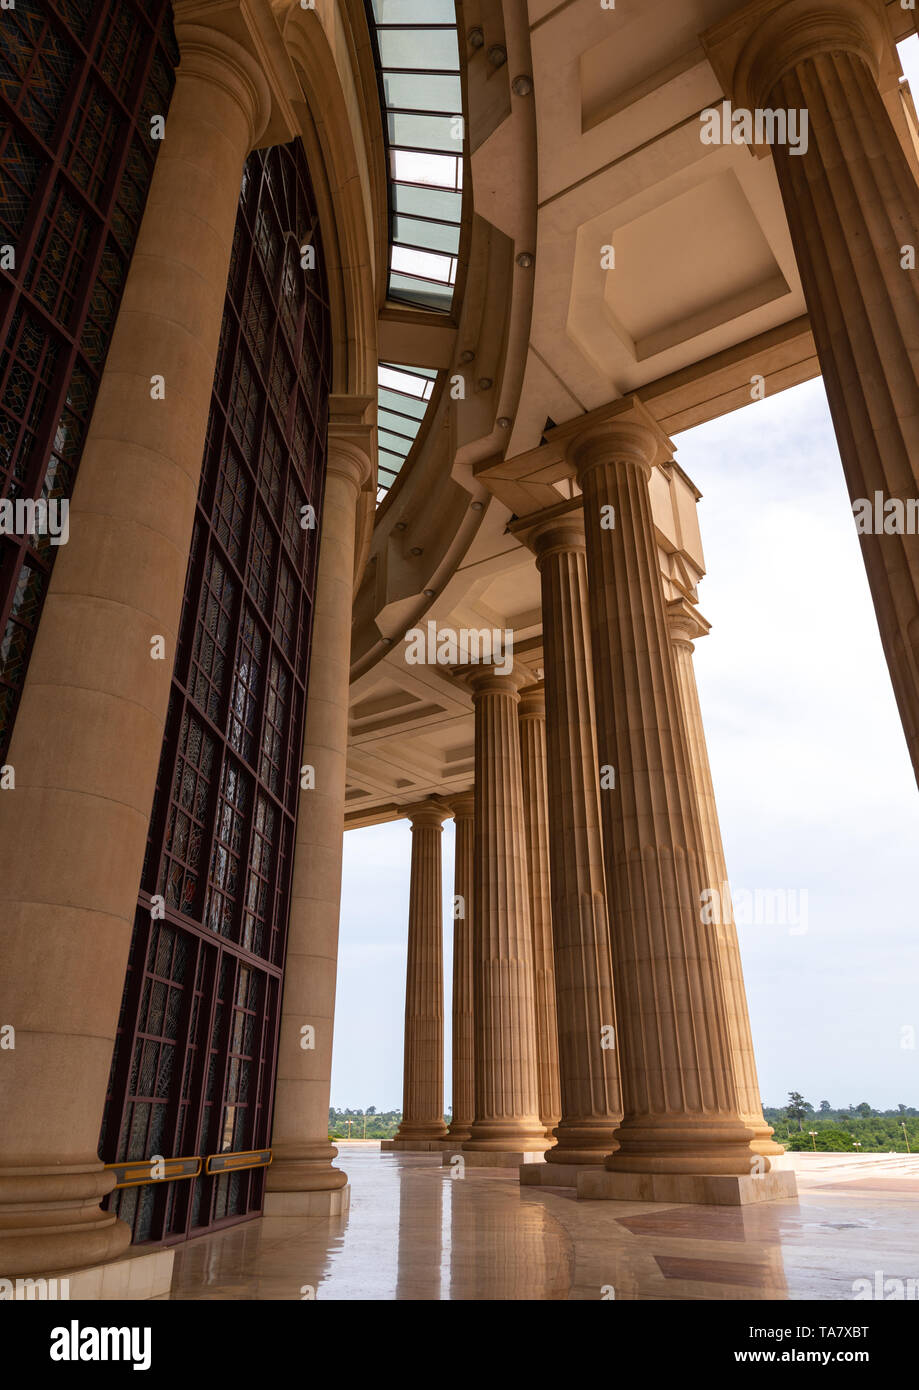 Colonnades in our lady of peace basilica christian cathedral built by Felix Houphouet-Boigny, Région des Lacs, Yamoussoukro, Ivory Coast Stock Photo